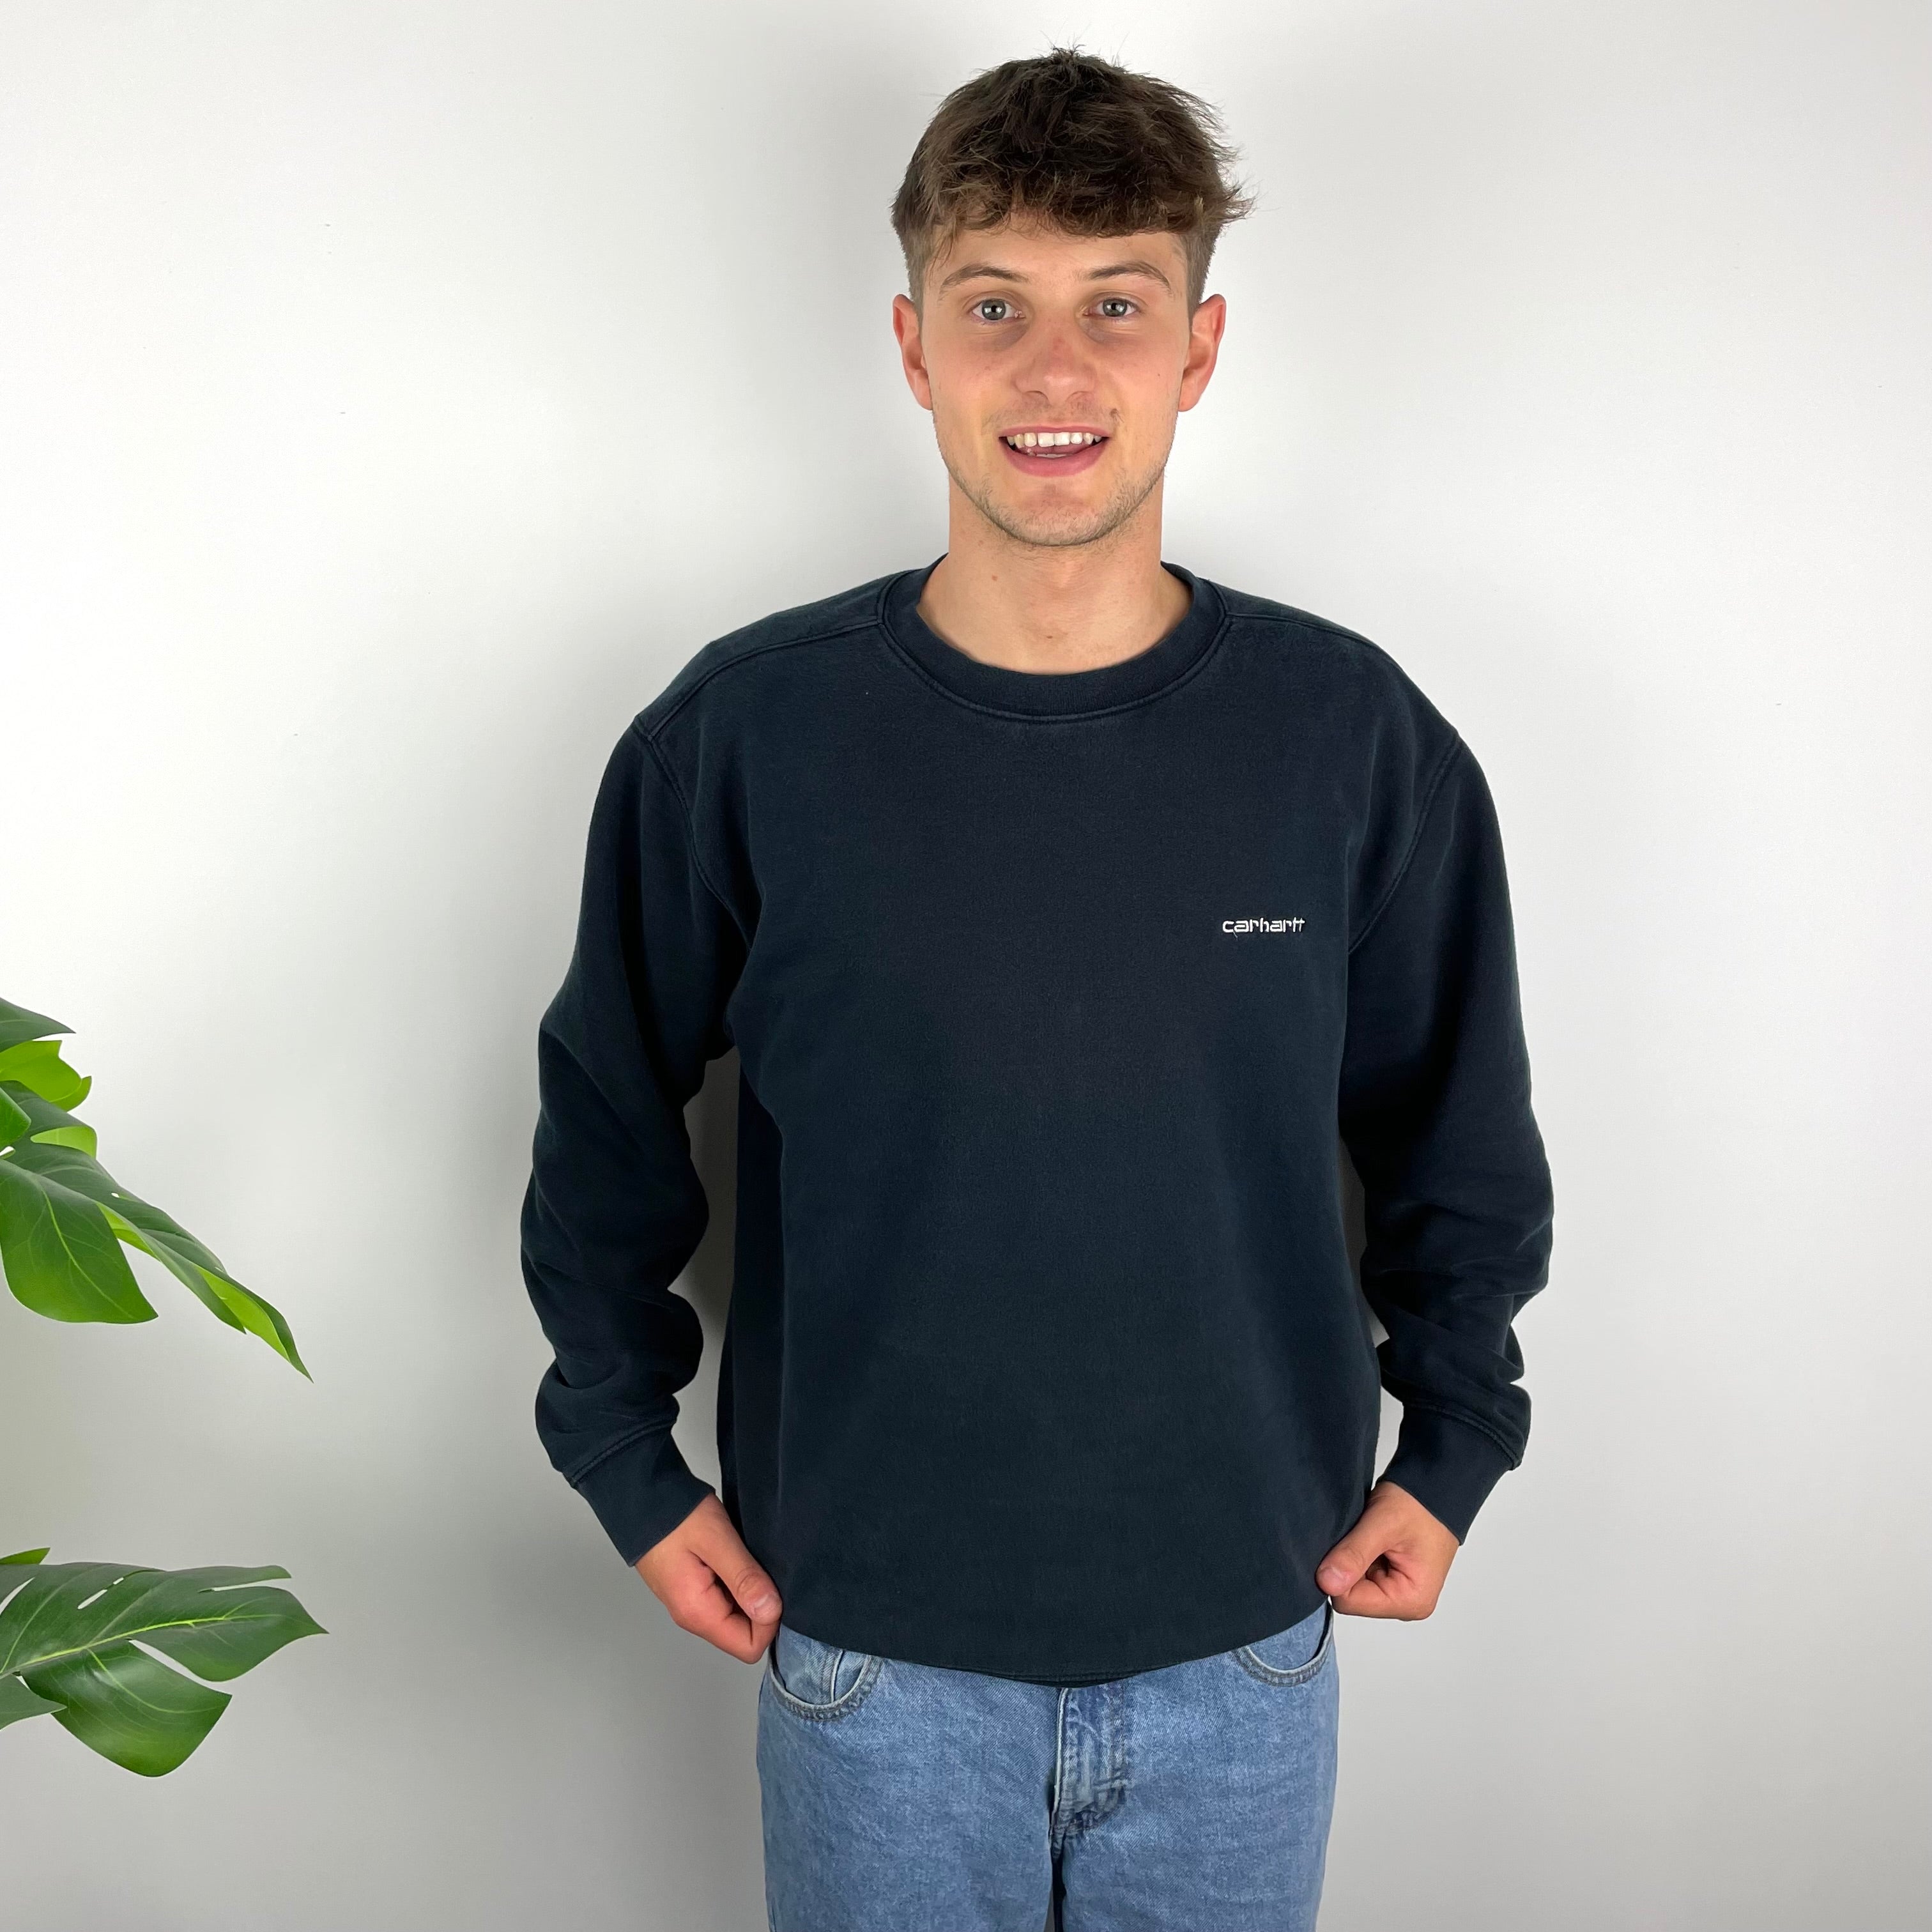 Carhartt RARE Navy Embroidered Spell Out Sweatshirt (L)